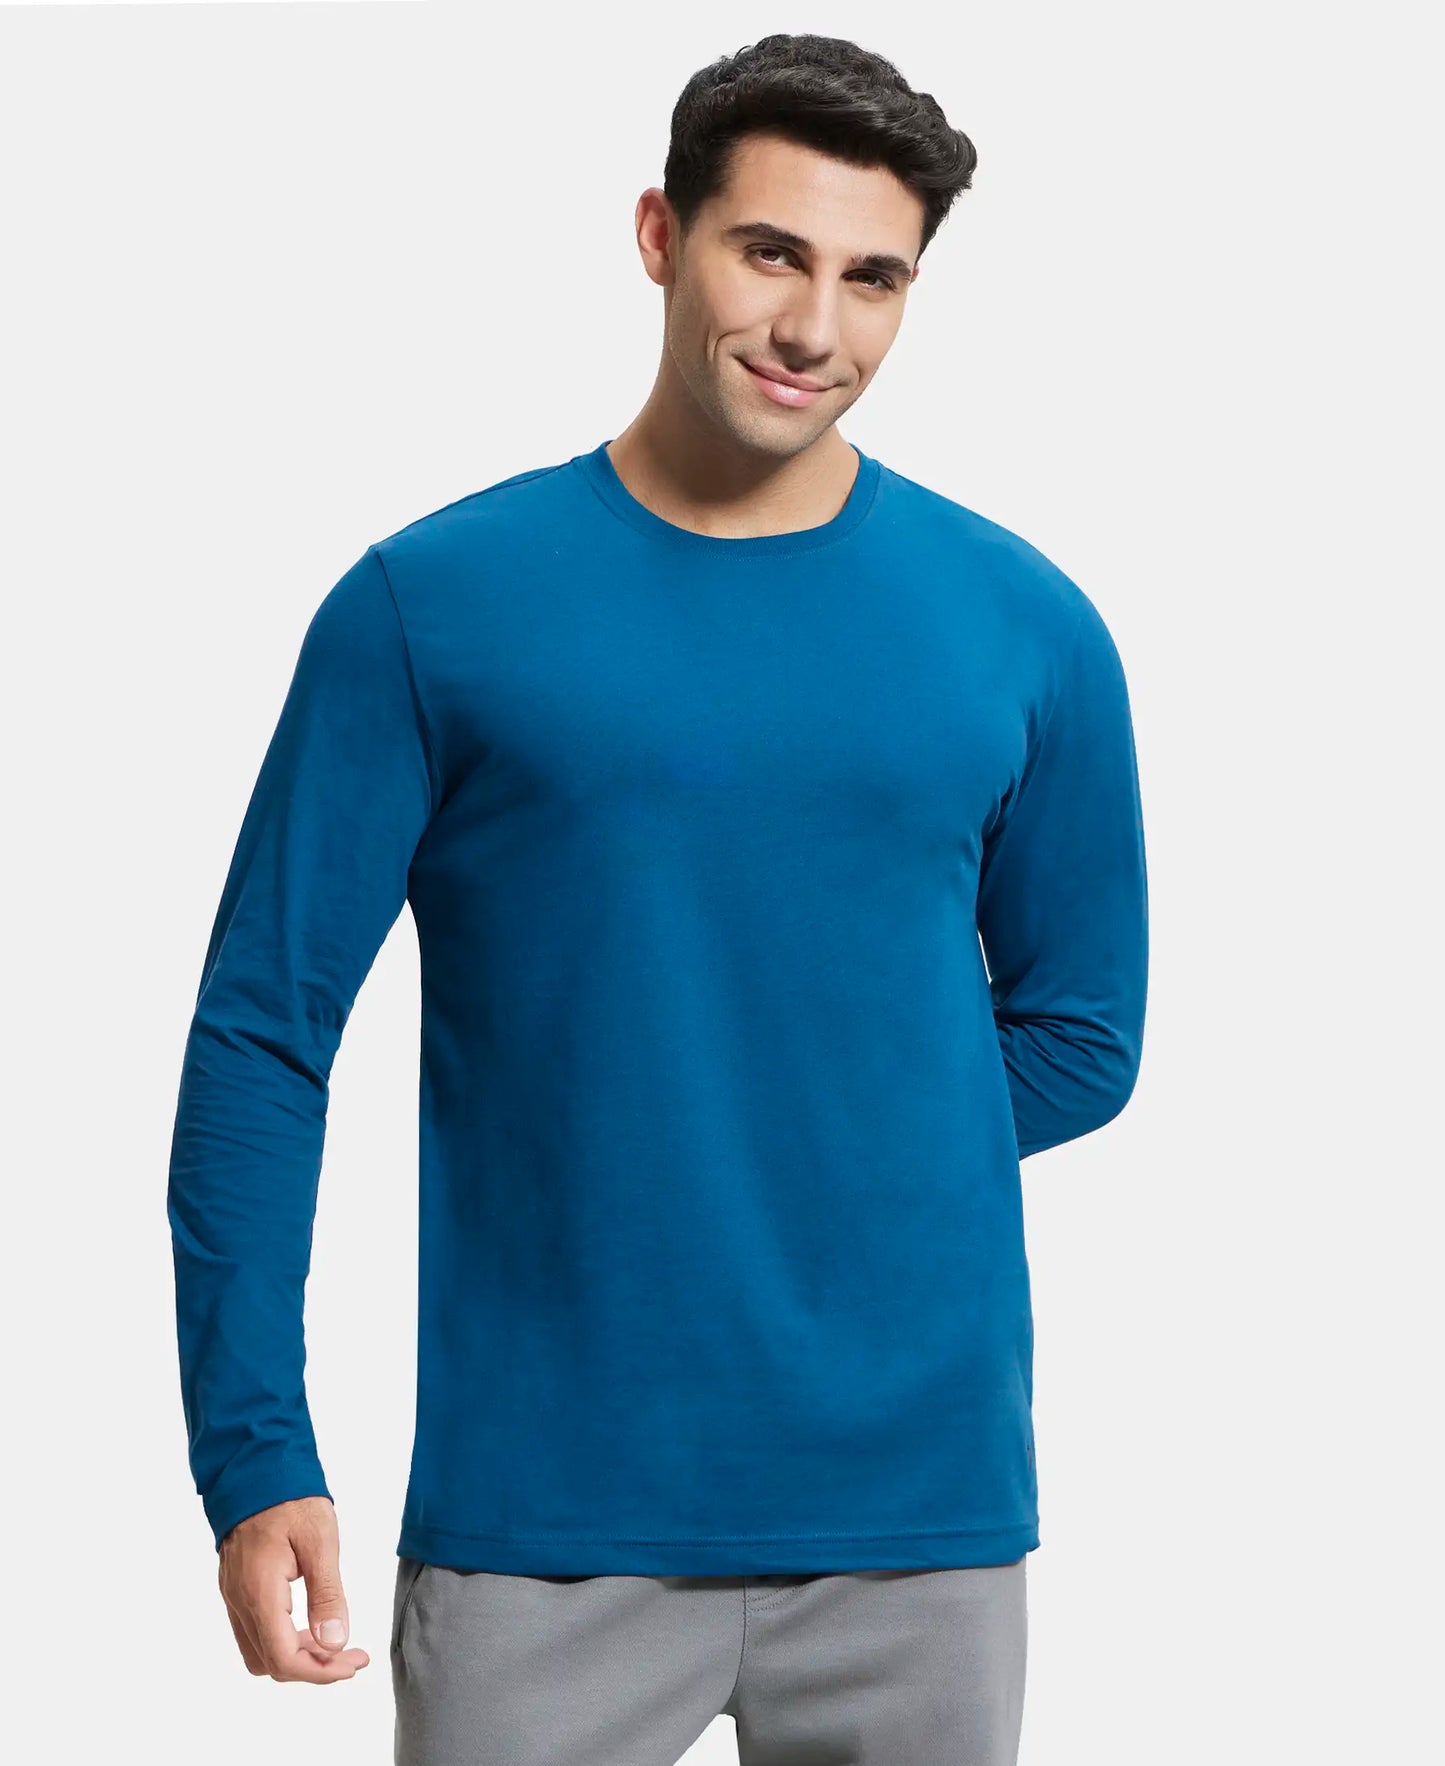 Super Combed Cotton Rich Solid Round Neck Full Sleeve T-Shirt - Seaport Teal-1